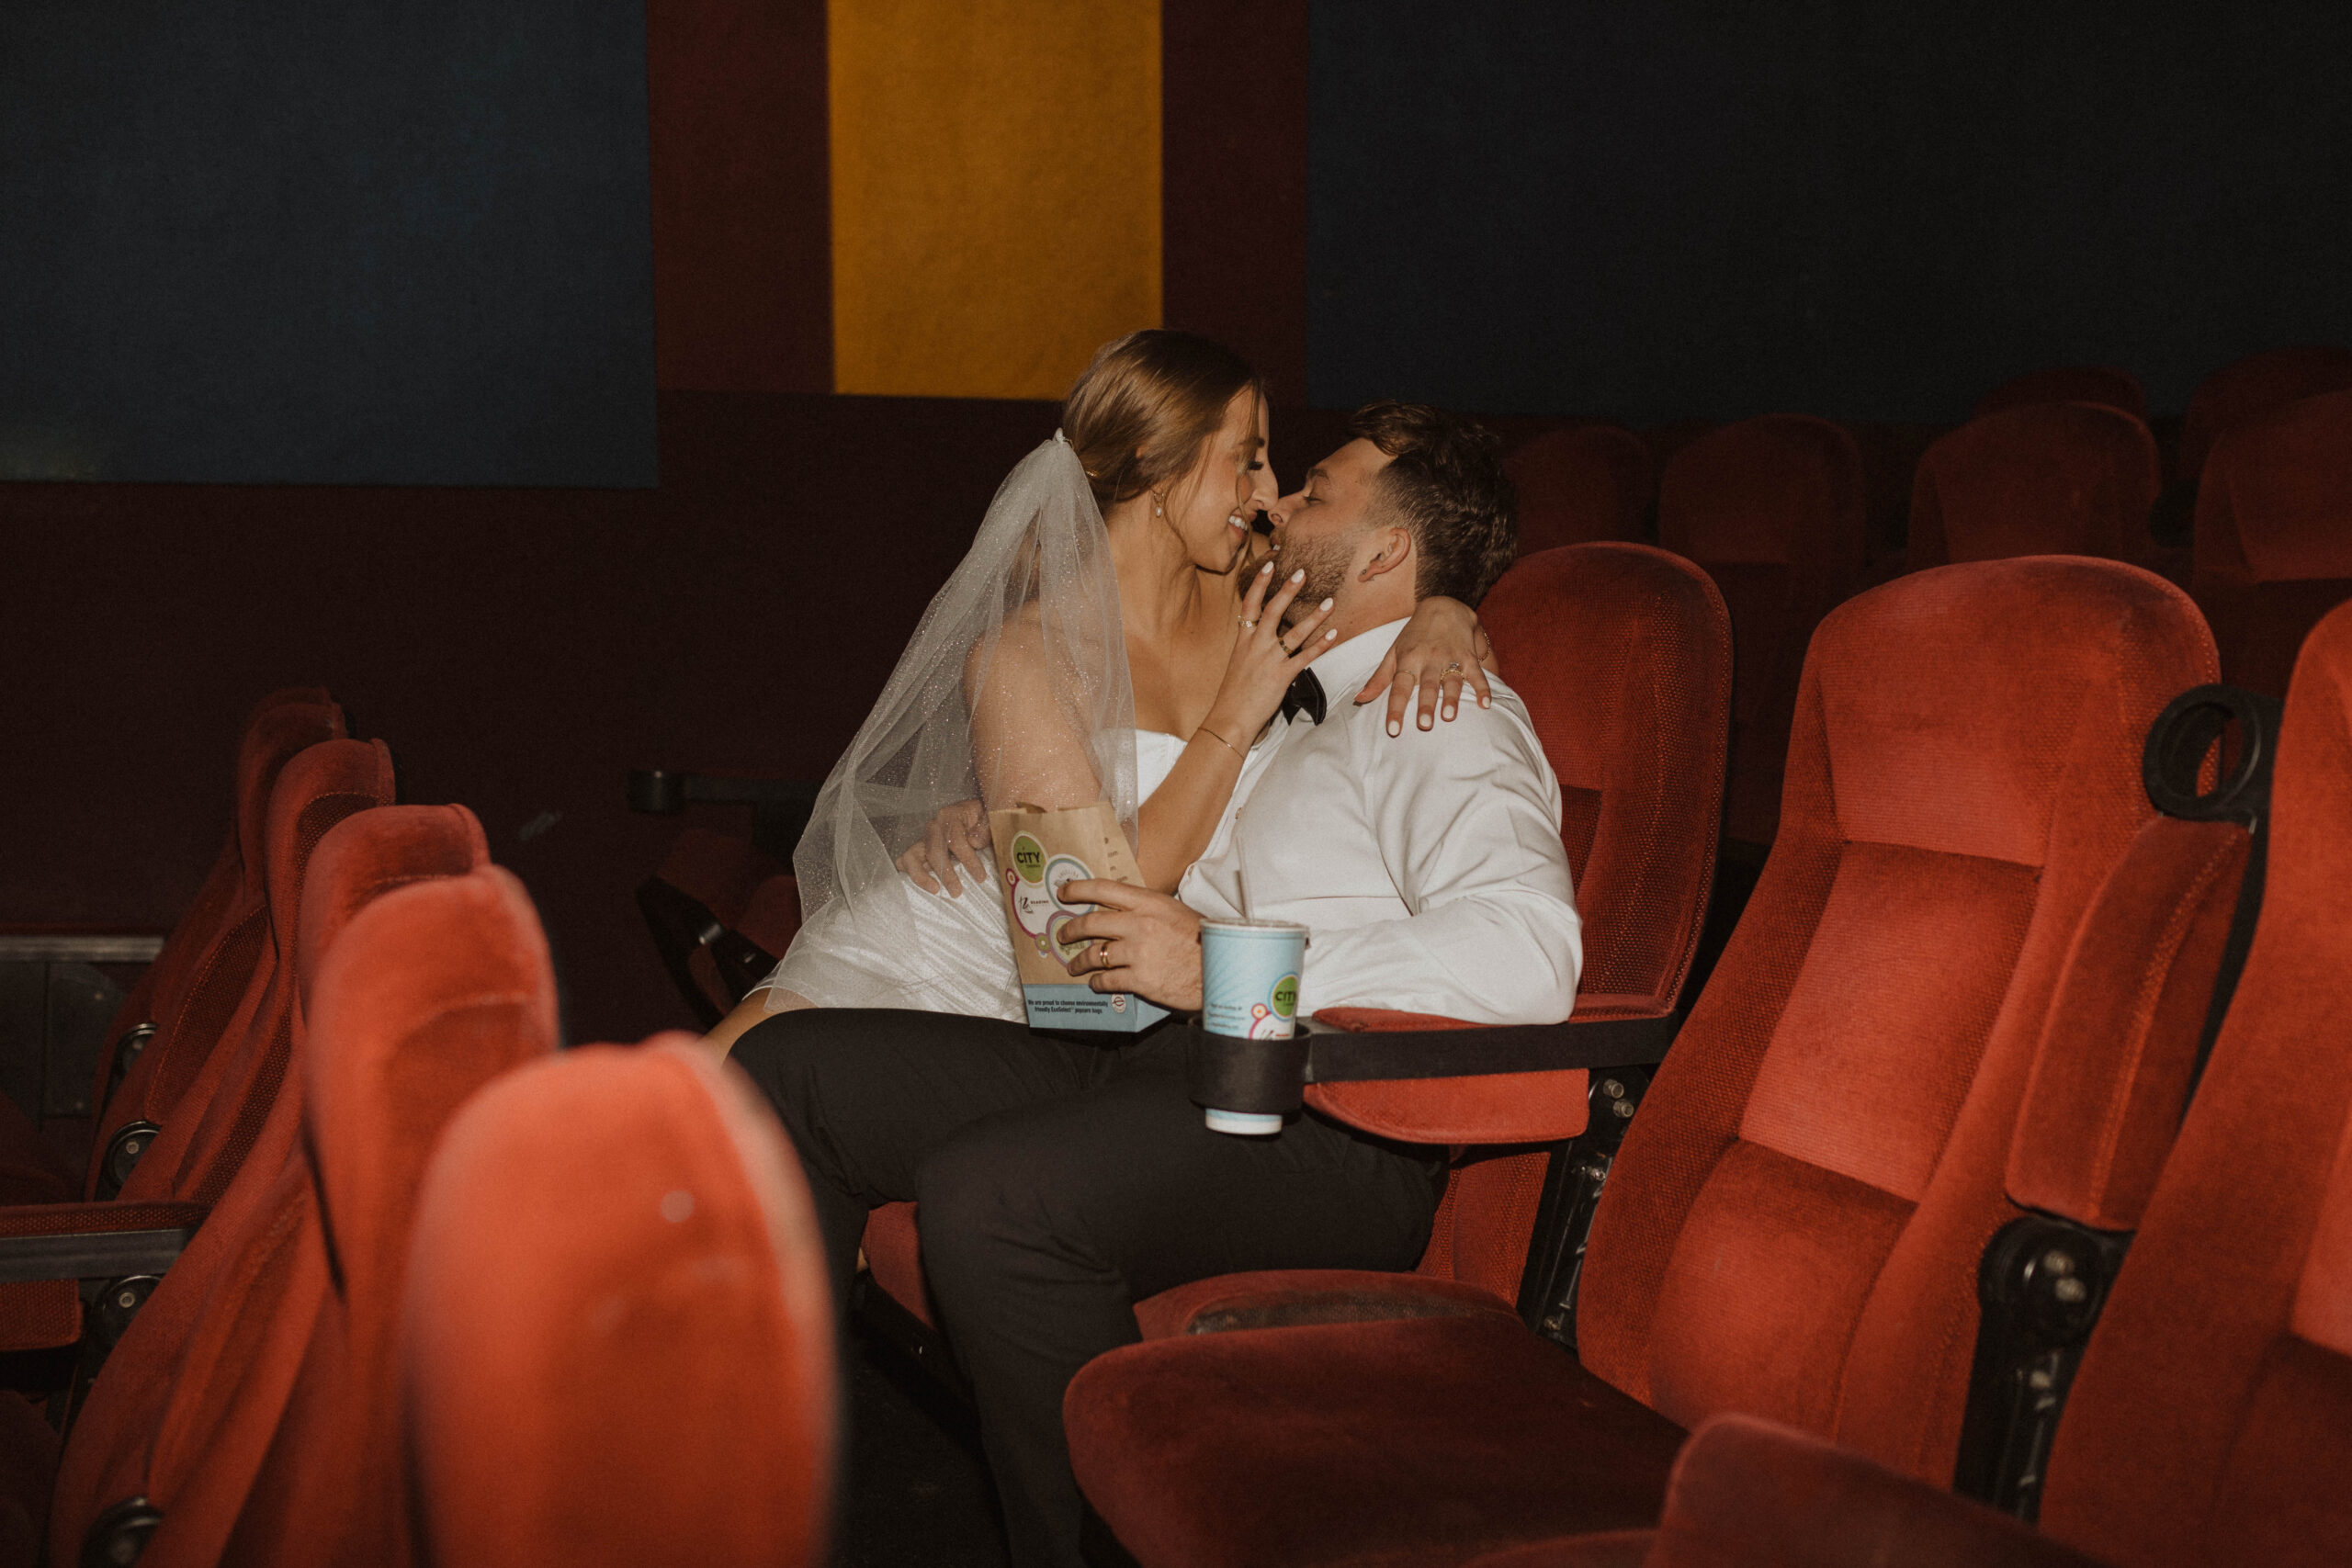 Elopement couple sitting in a movie theater feeding each other popcorn